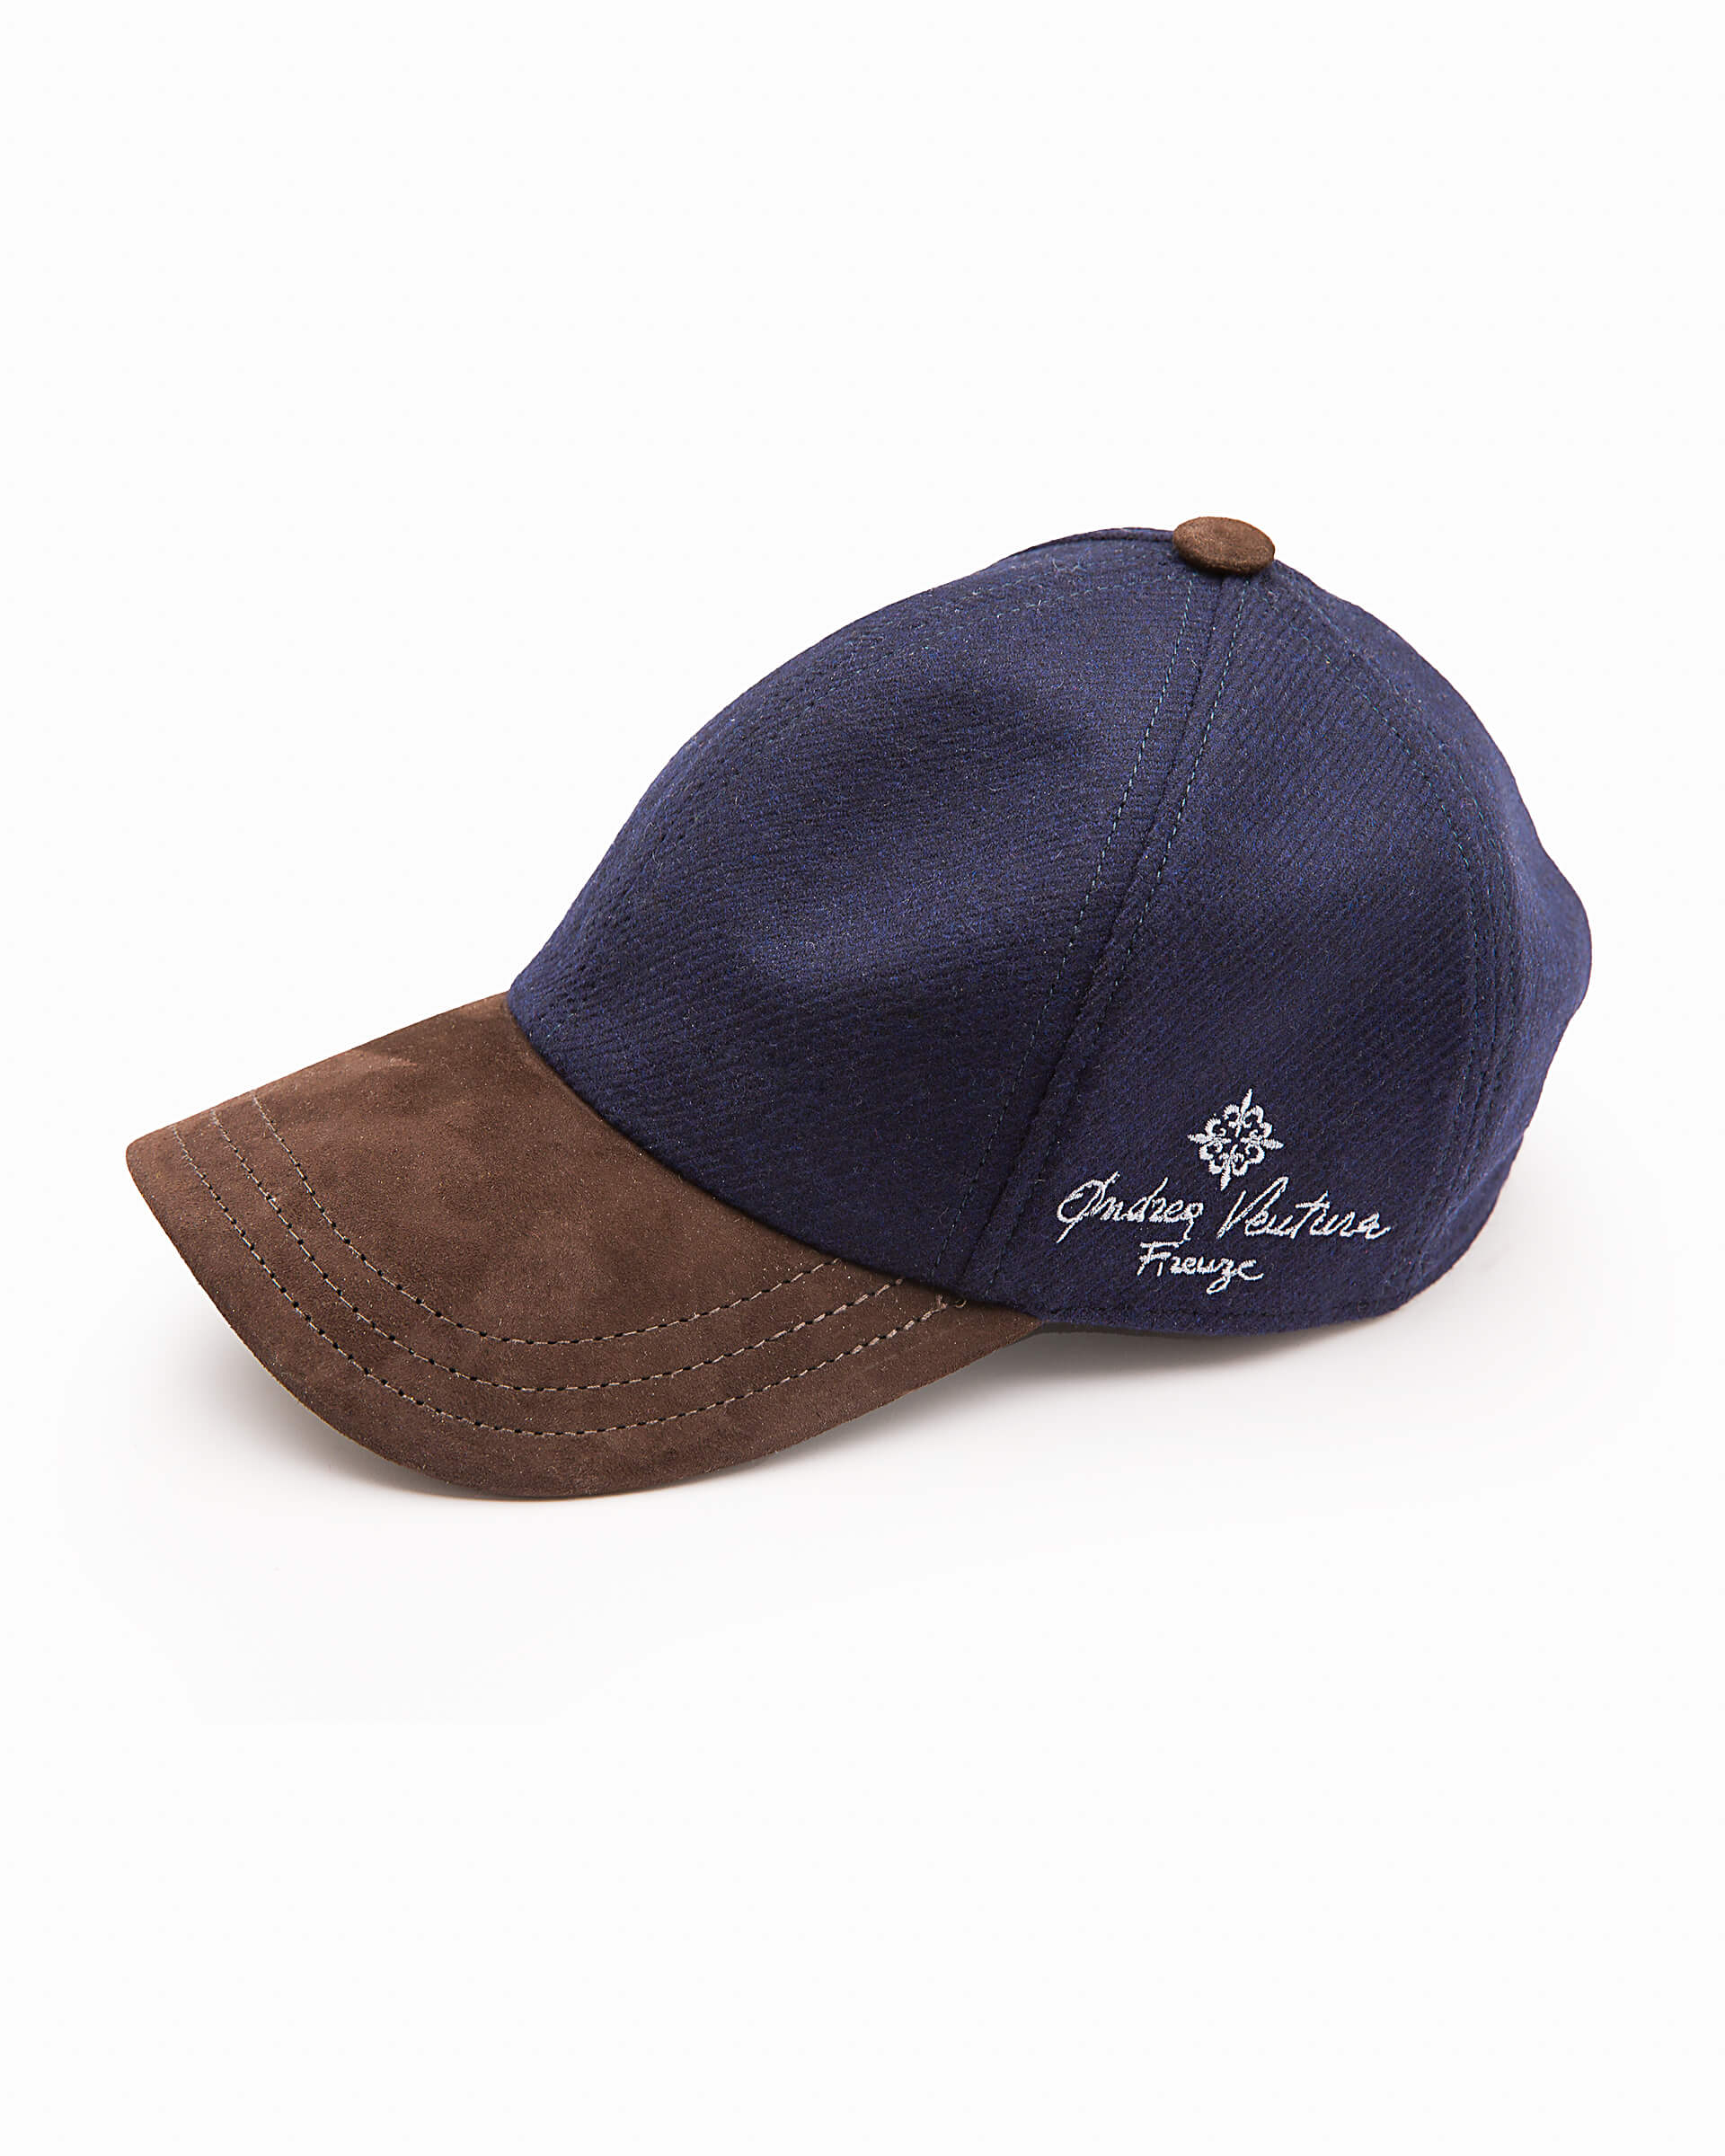 Baseball cap Firenze of - with Ventura hat water-repellent eclipse made blue cashmere Andrea visor